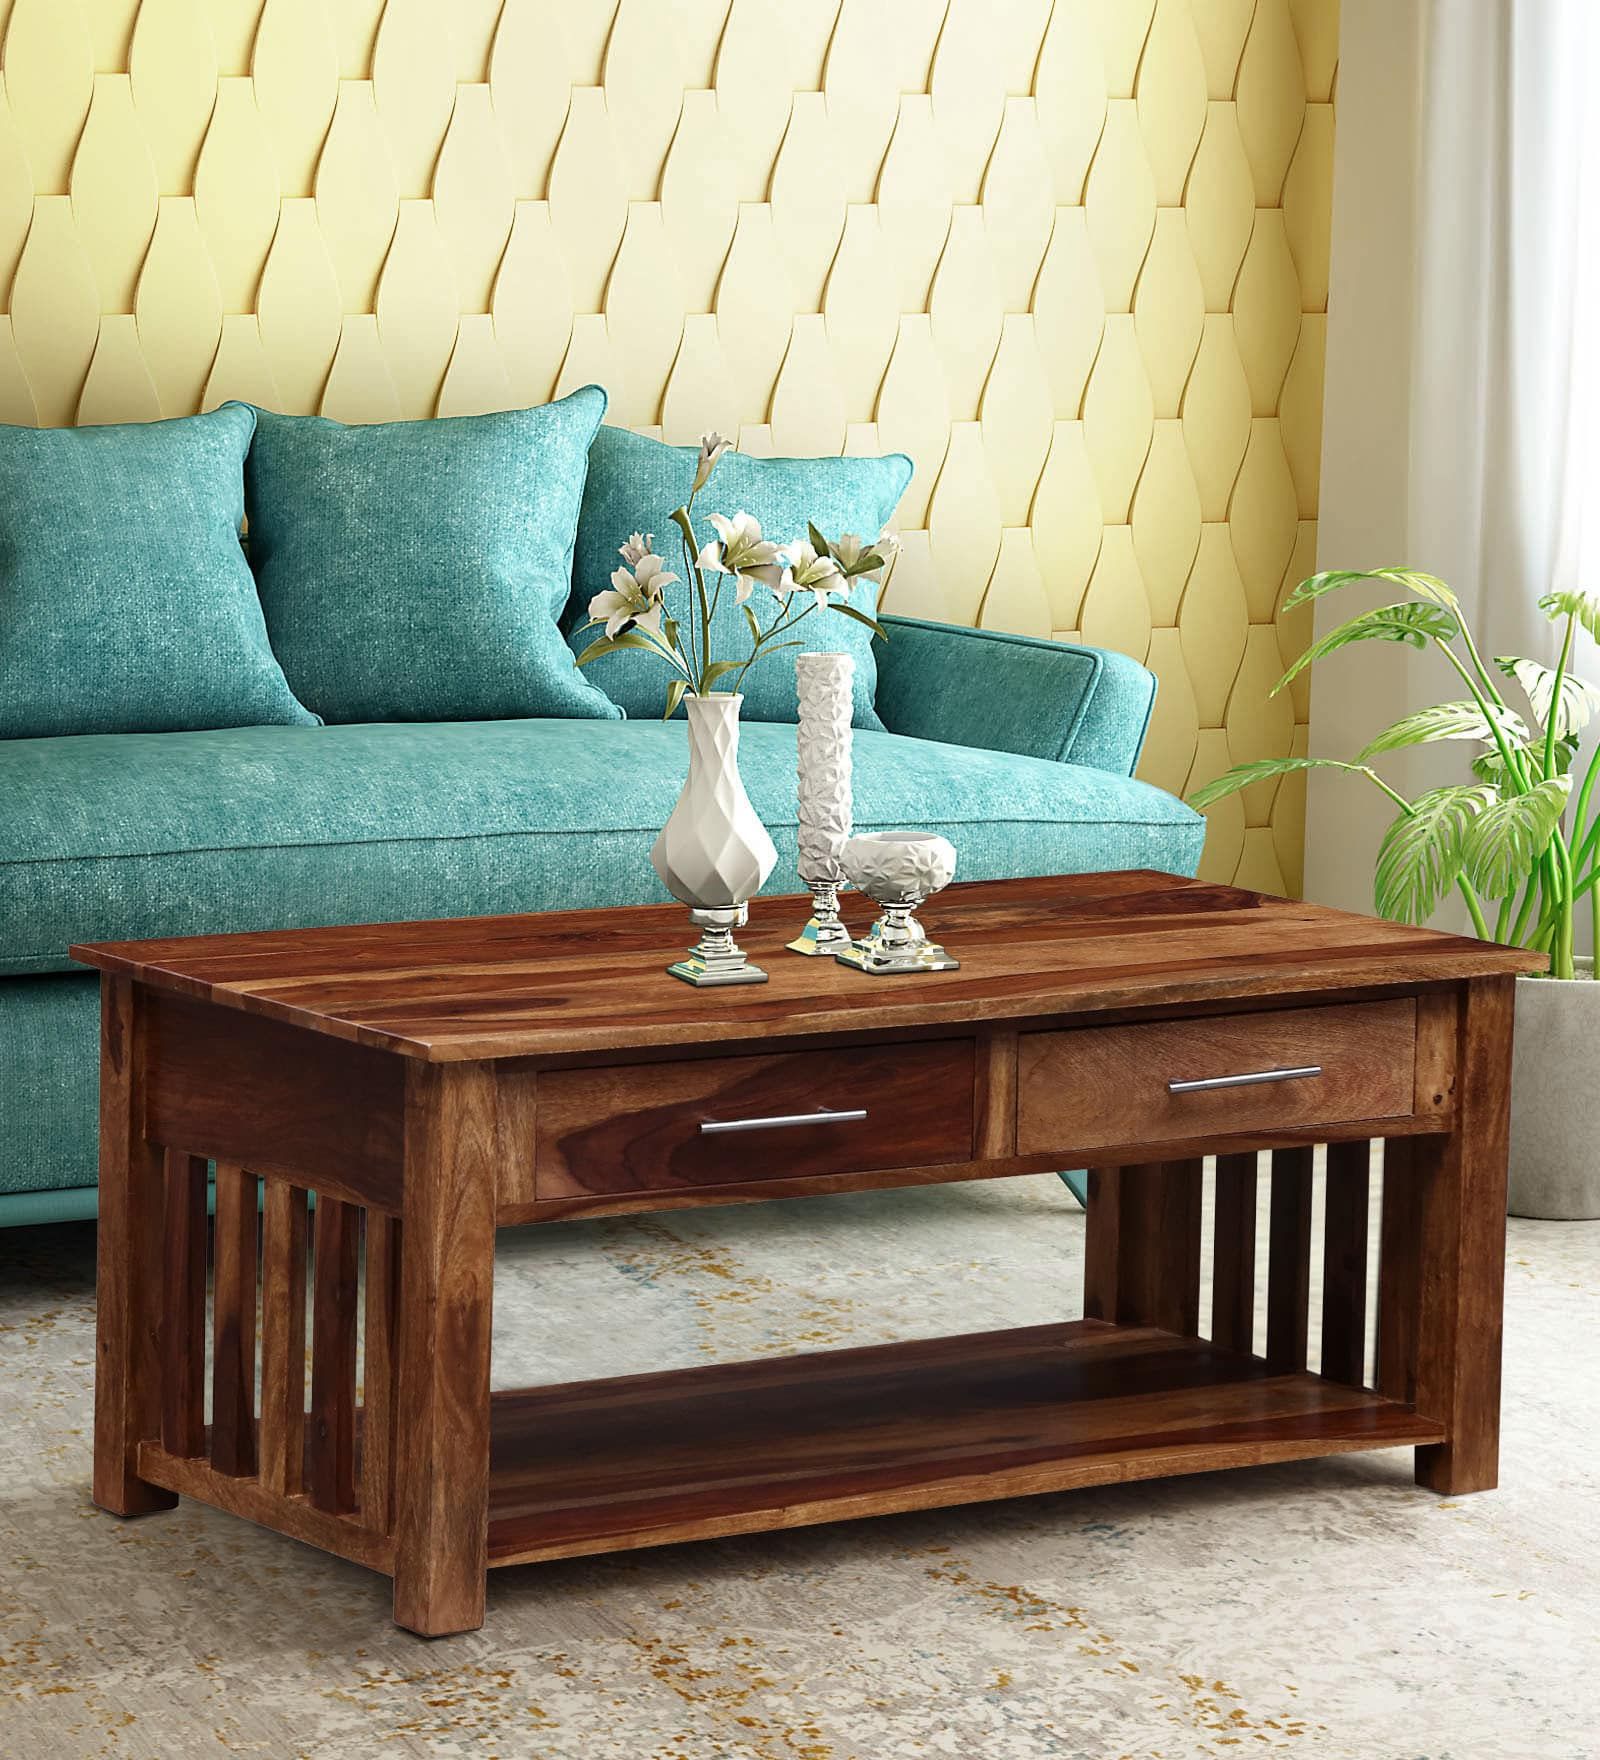 Large Sheesham Solid Wood Coffee Table In Rustic Teak Finishmft Within Coffee Tables With Solid Legs (View 9 of 20)